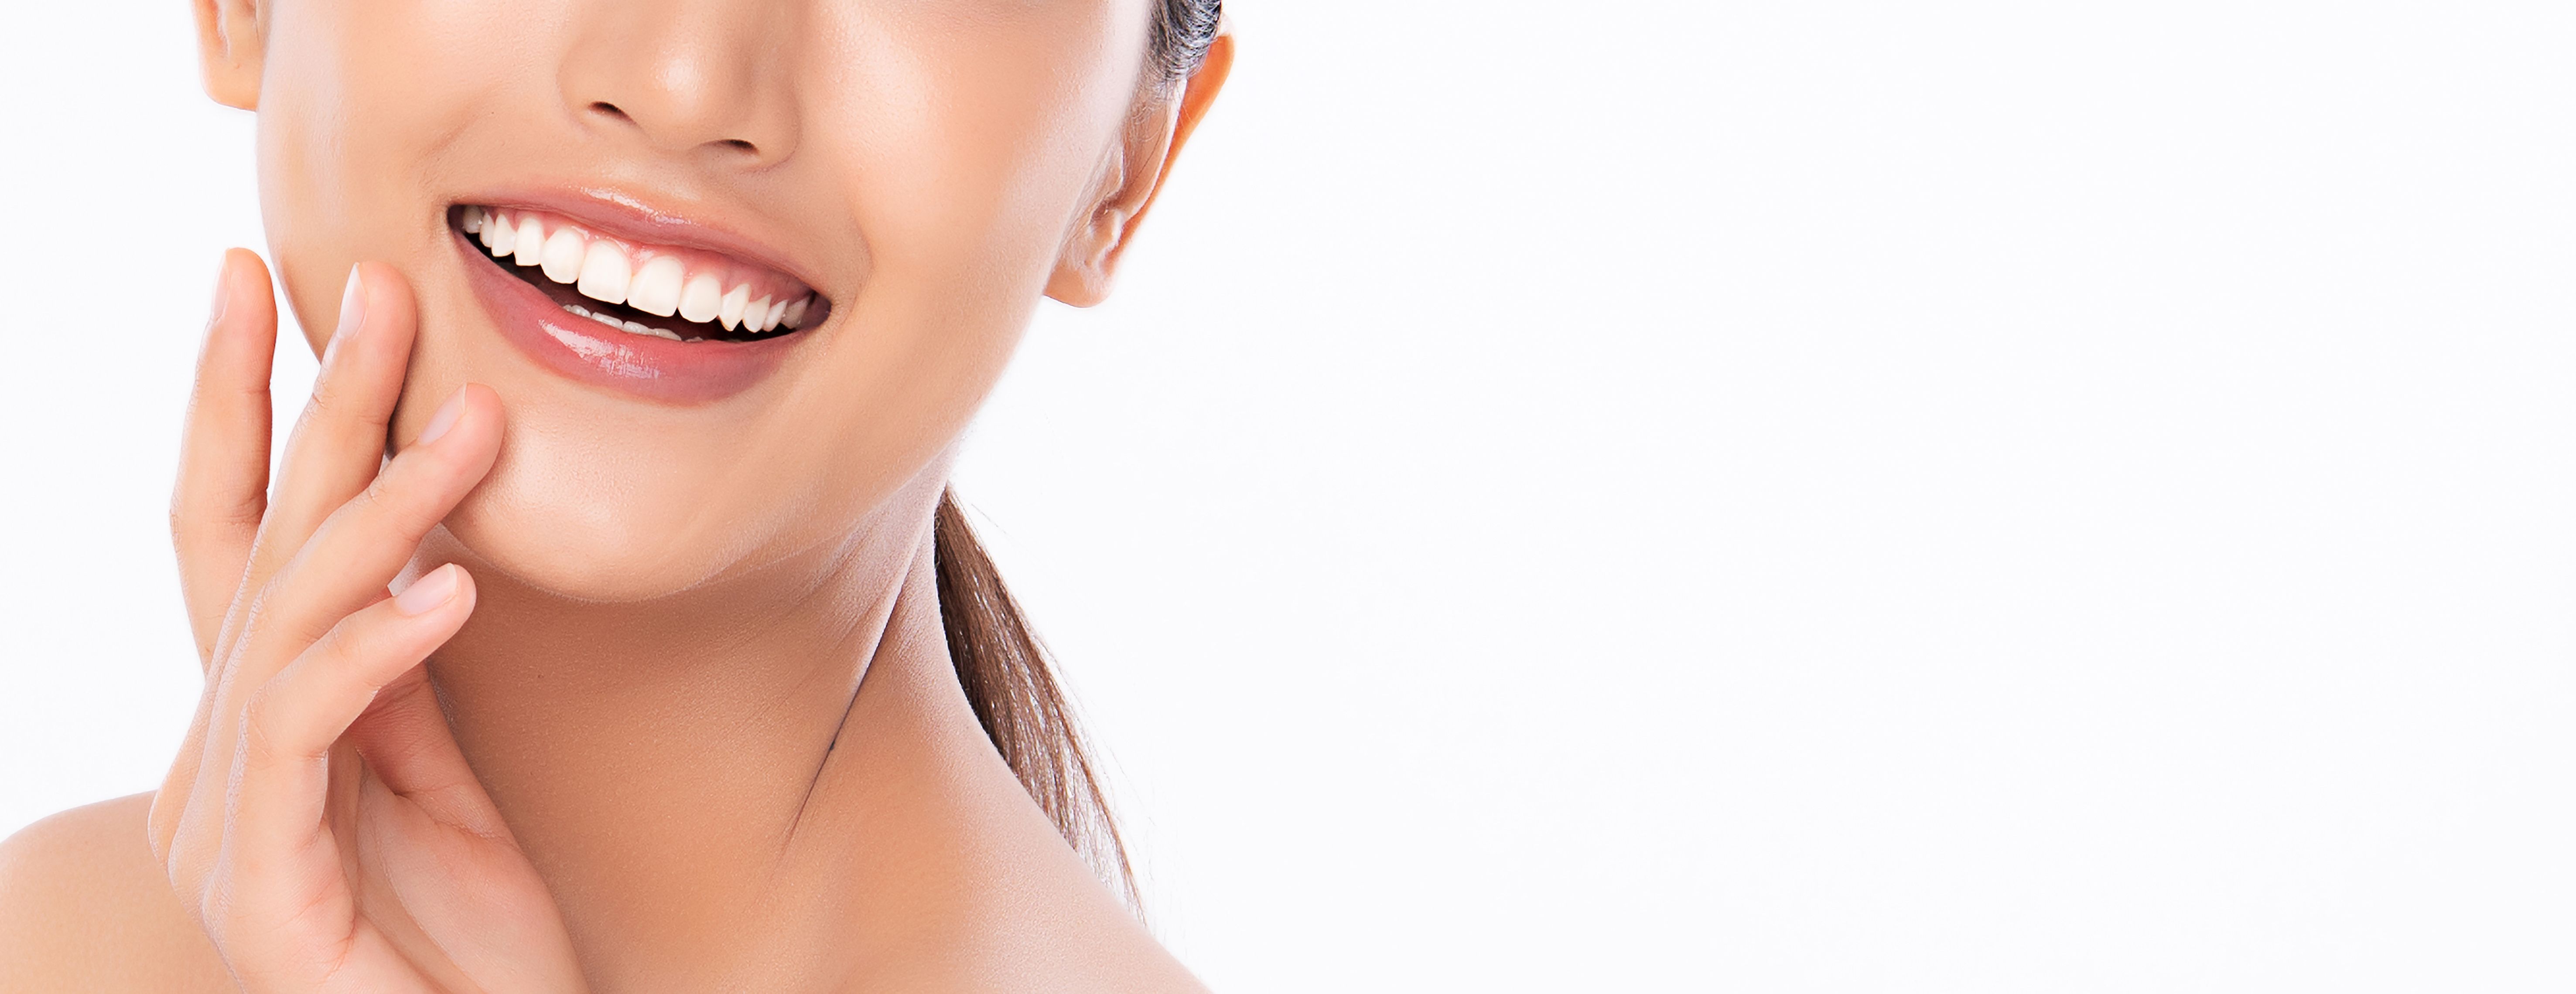 Damaged Teeth: Are My Teeth Too Far Gone to Benefit From Cosmetic Dental Procedures?